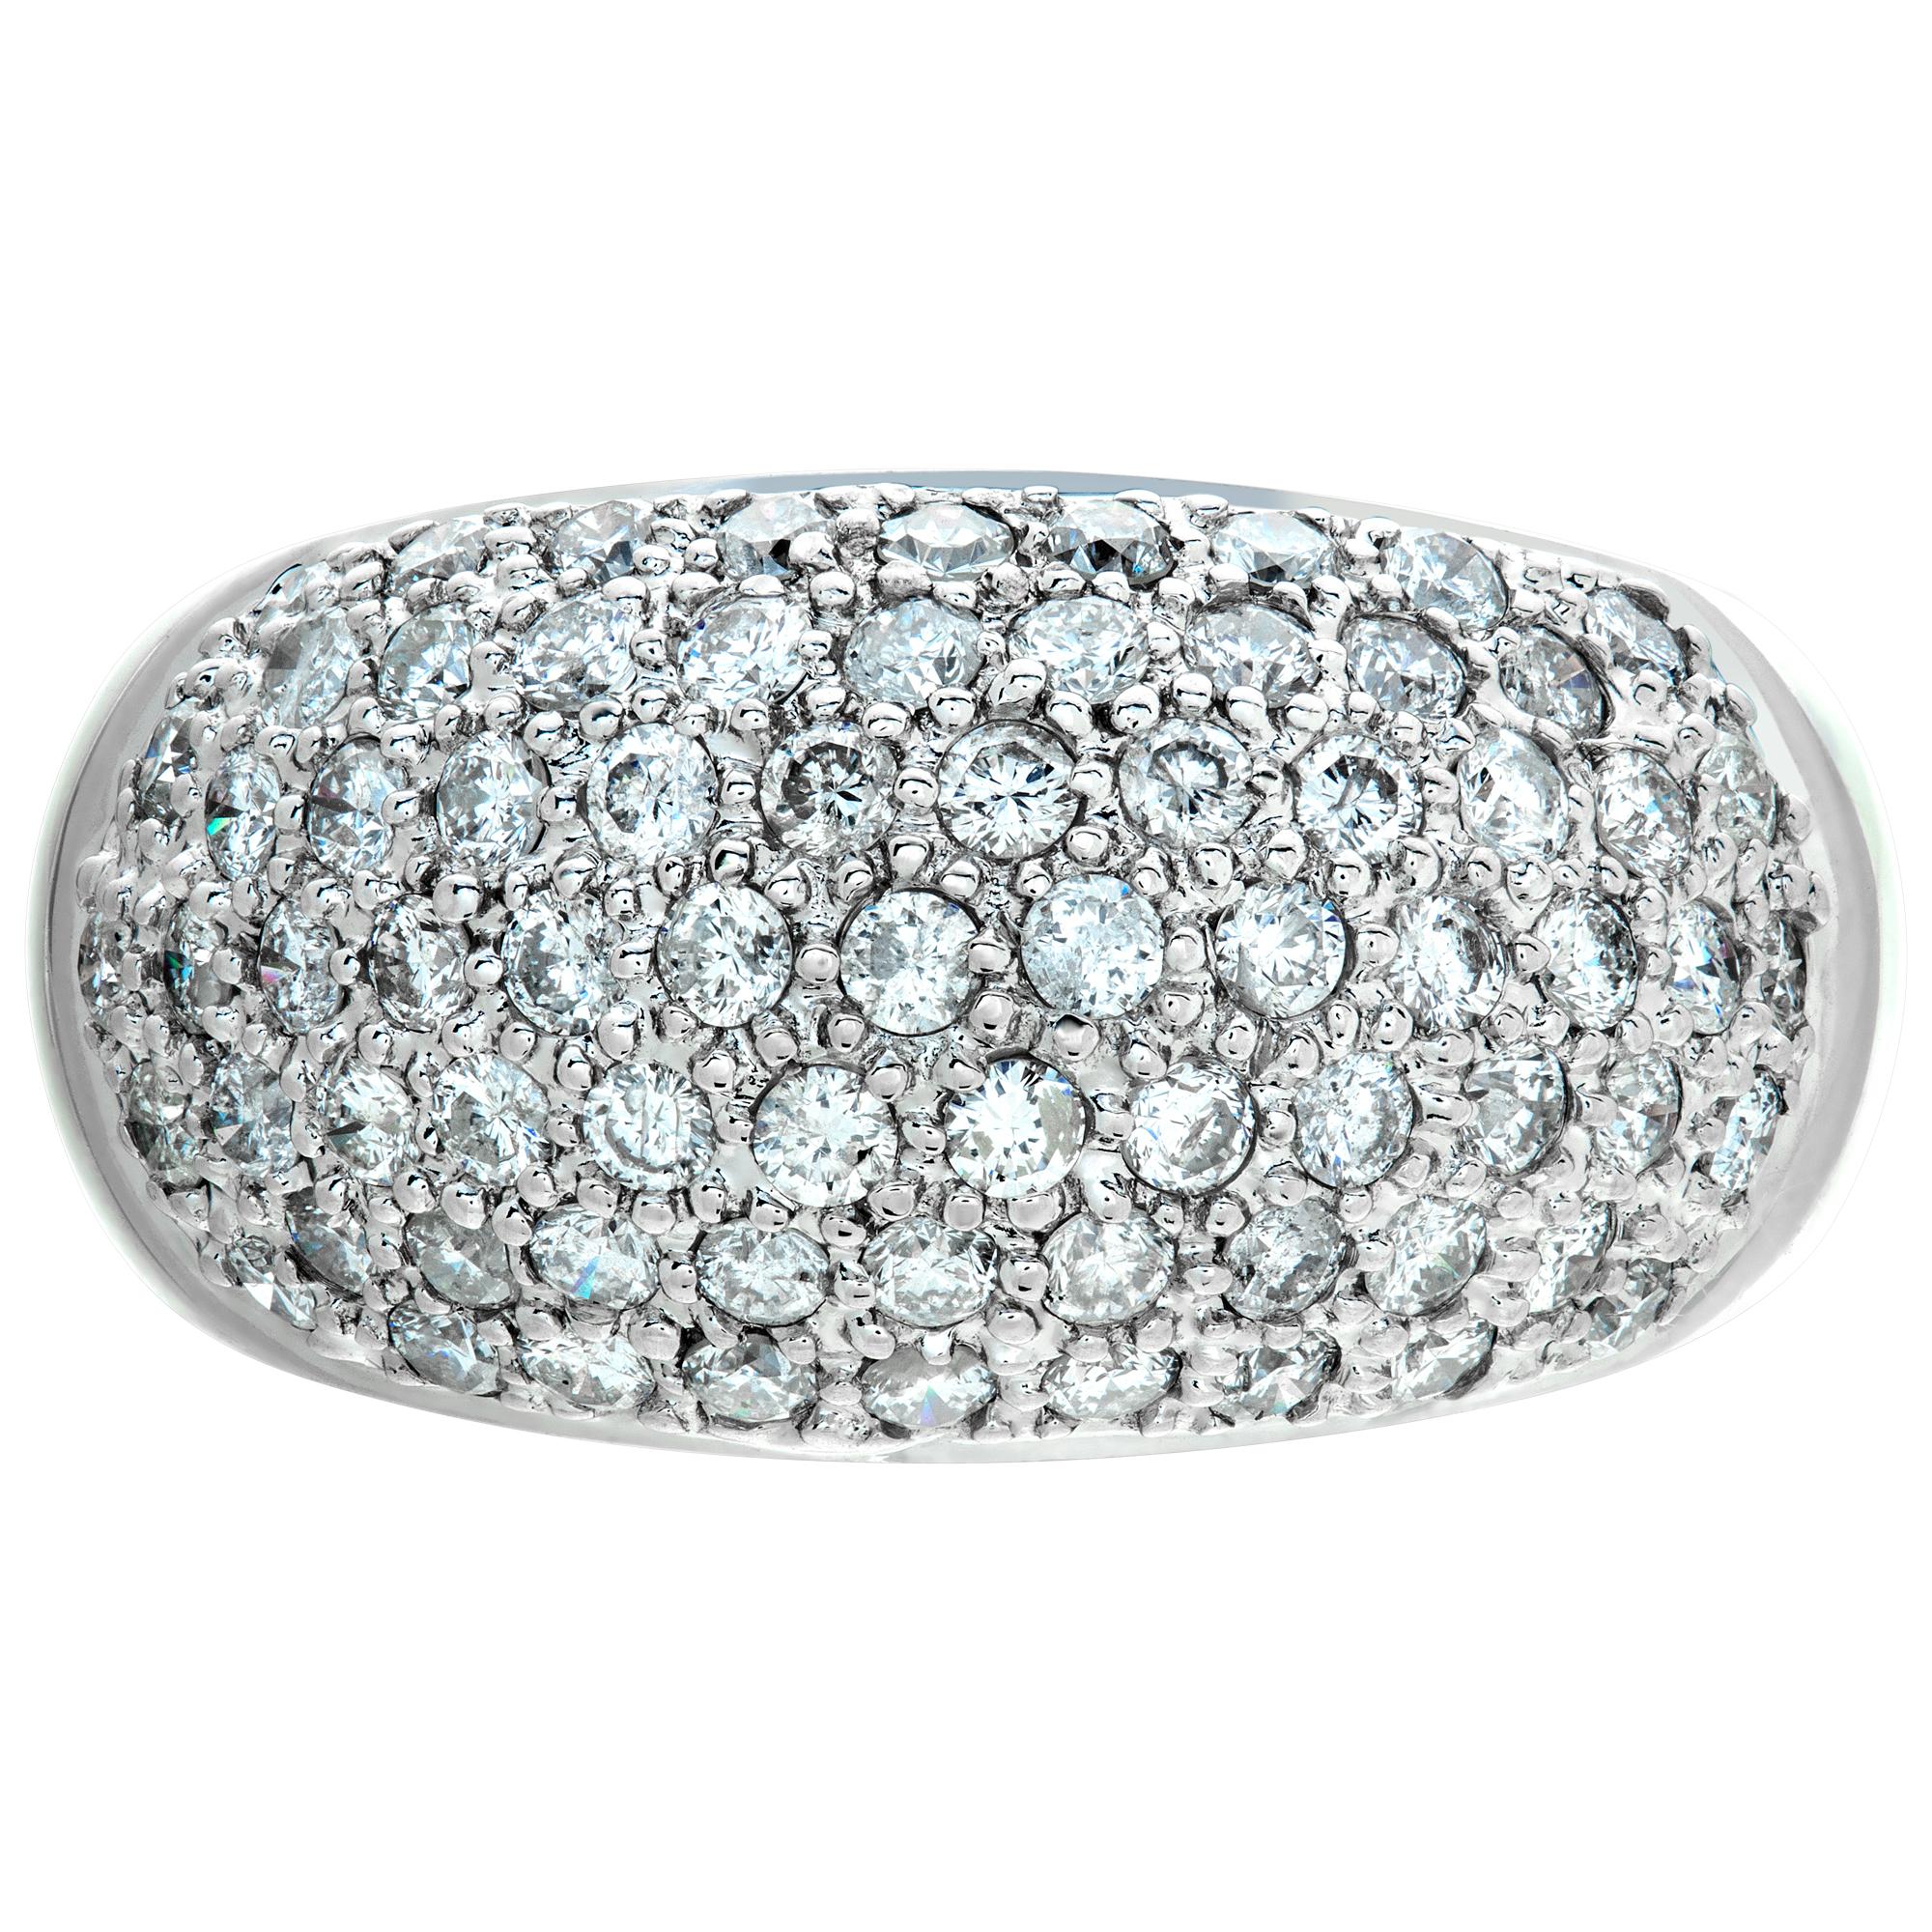 Domed pave diamond ring in 14k white gold with approximately 3.00 carats in pave set round diamonds (G-H color, SI2 clarity). Size 9. Width at head of ring: 12.5mm, width at shank 4.0mm.This Diamond ring is currently size 9 and some items can be